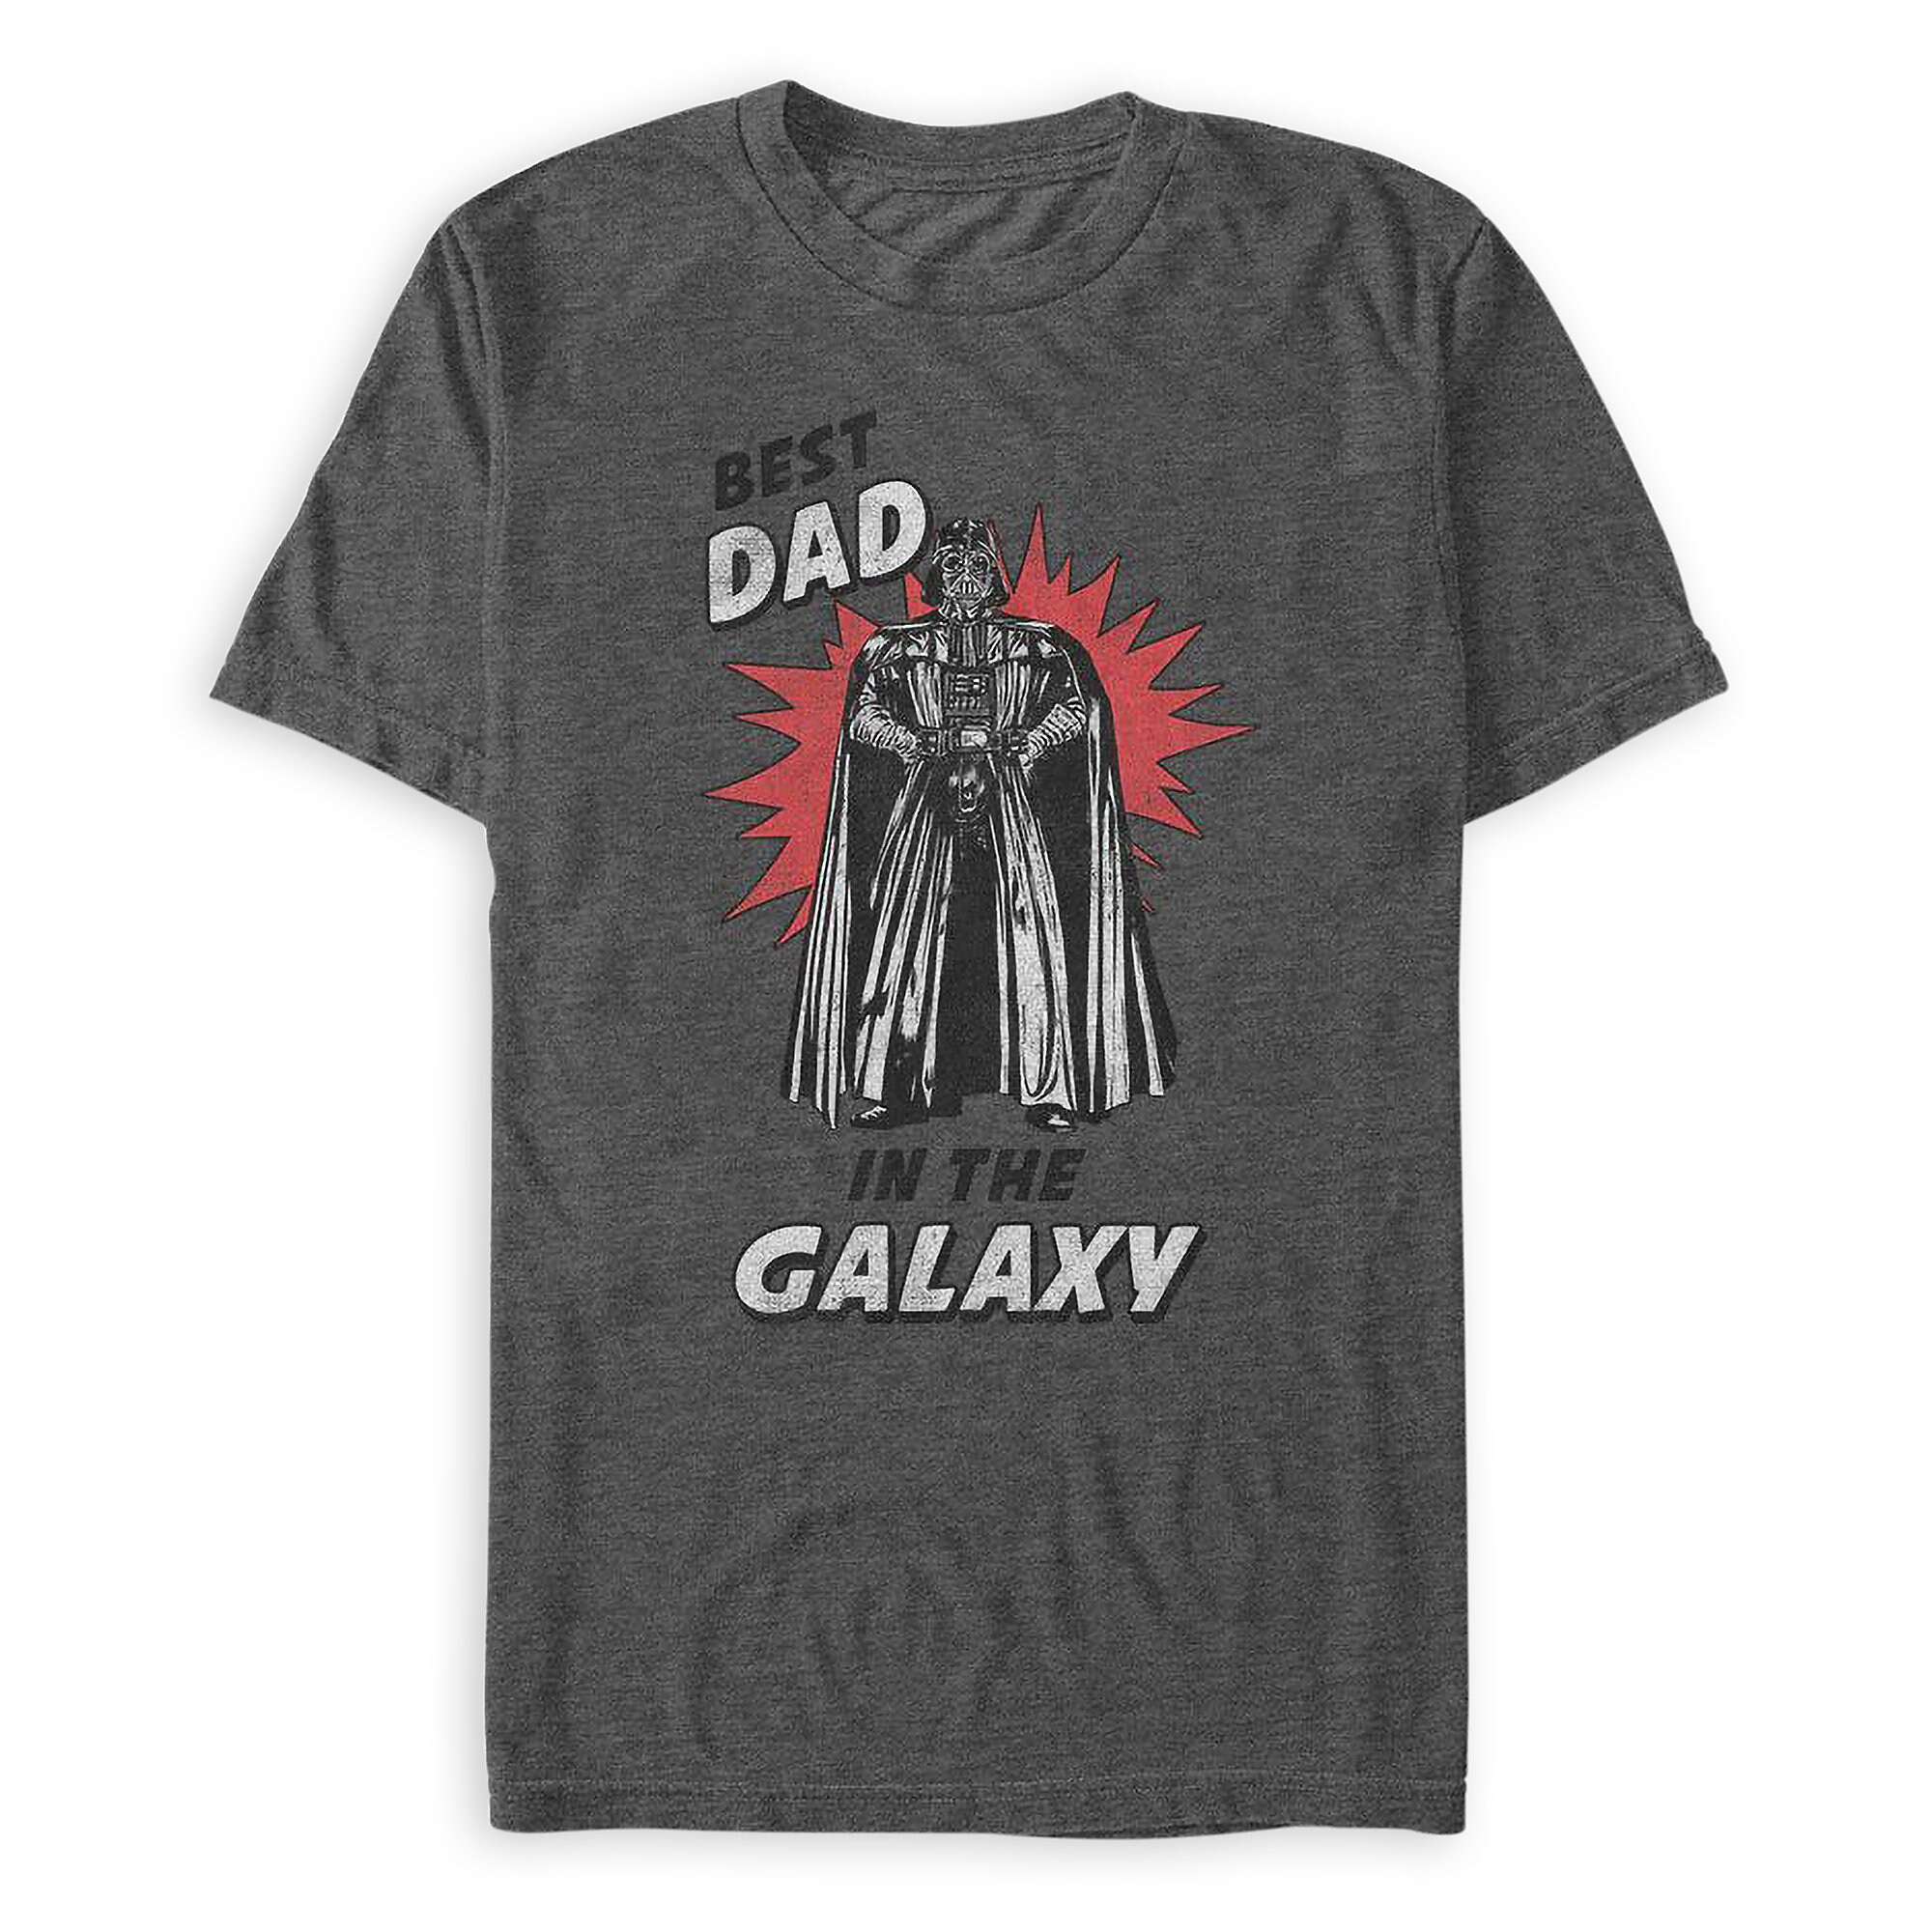 Darth Vader ''Best Dad in the Galaxy'' T-Shirt for Men